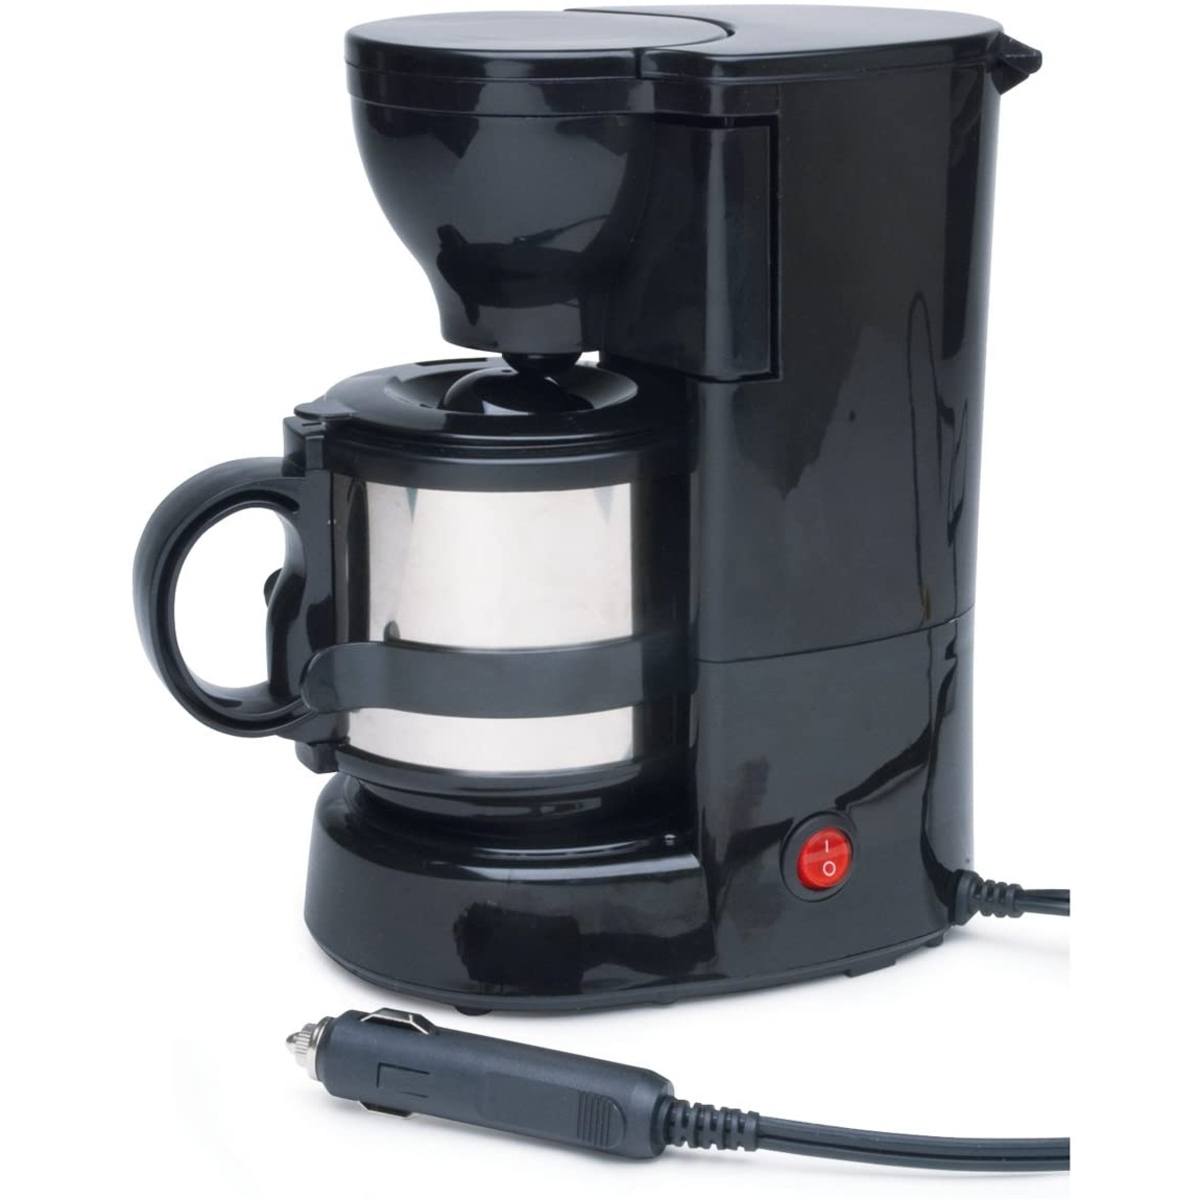 2 cup coffee maker